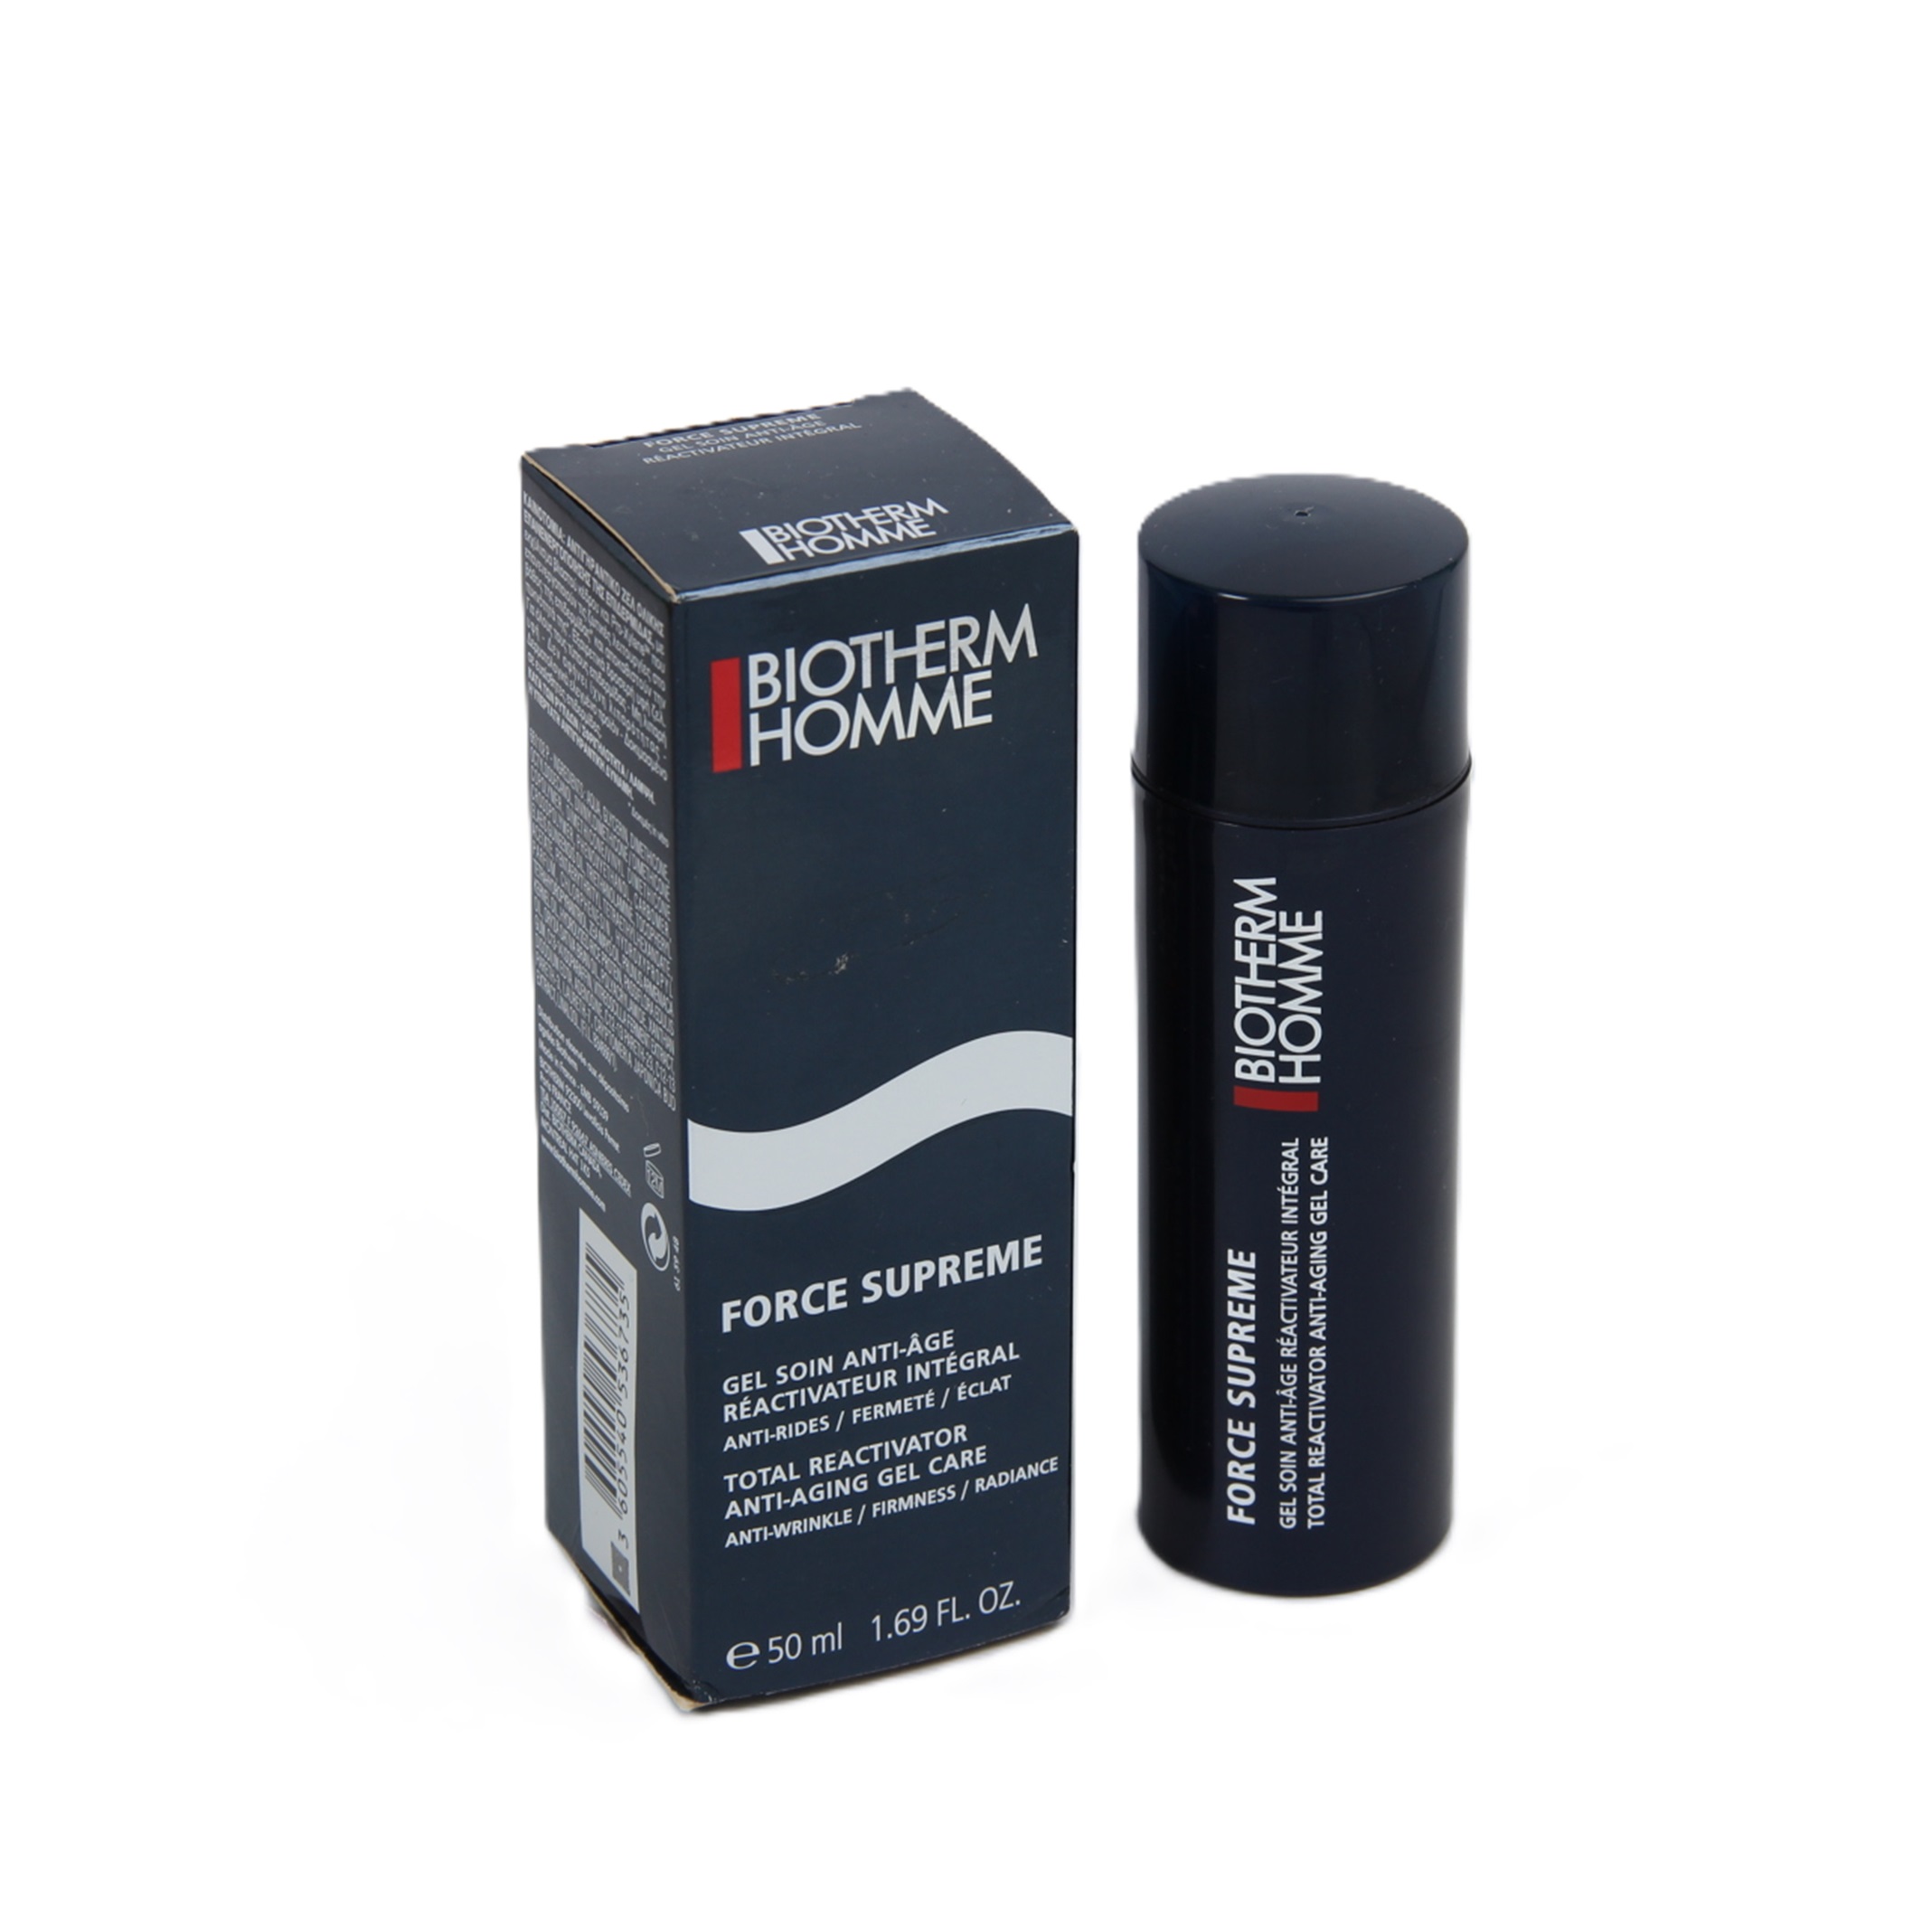 BIOTHERM HOMME FORCE SUPREME GEL  Reactivating anti aging care 50 ml